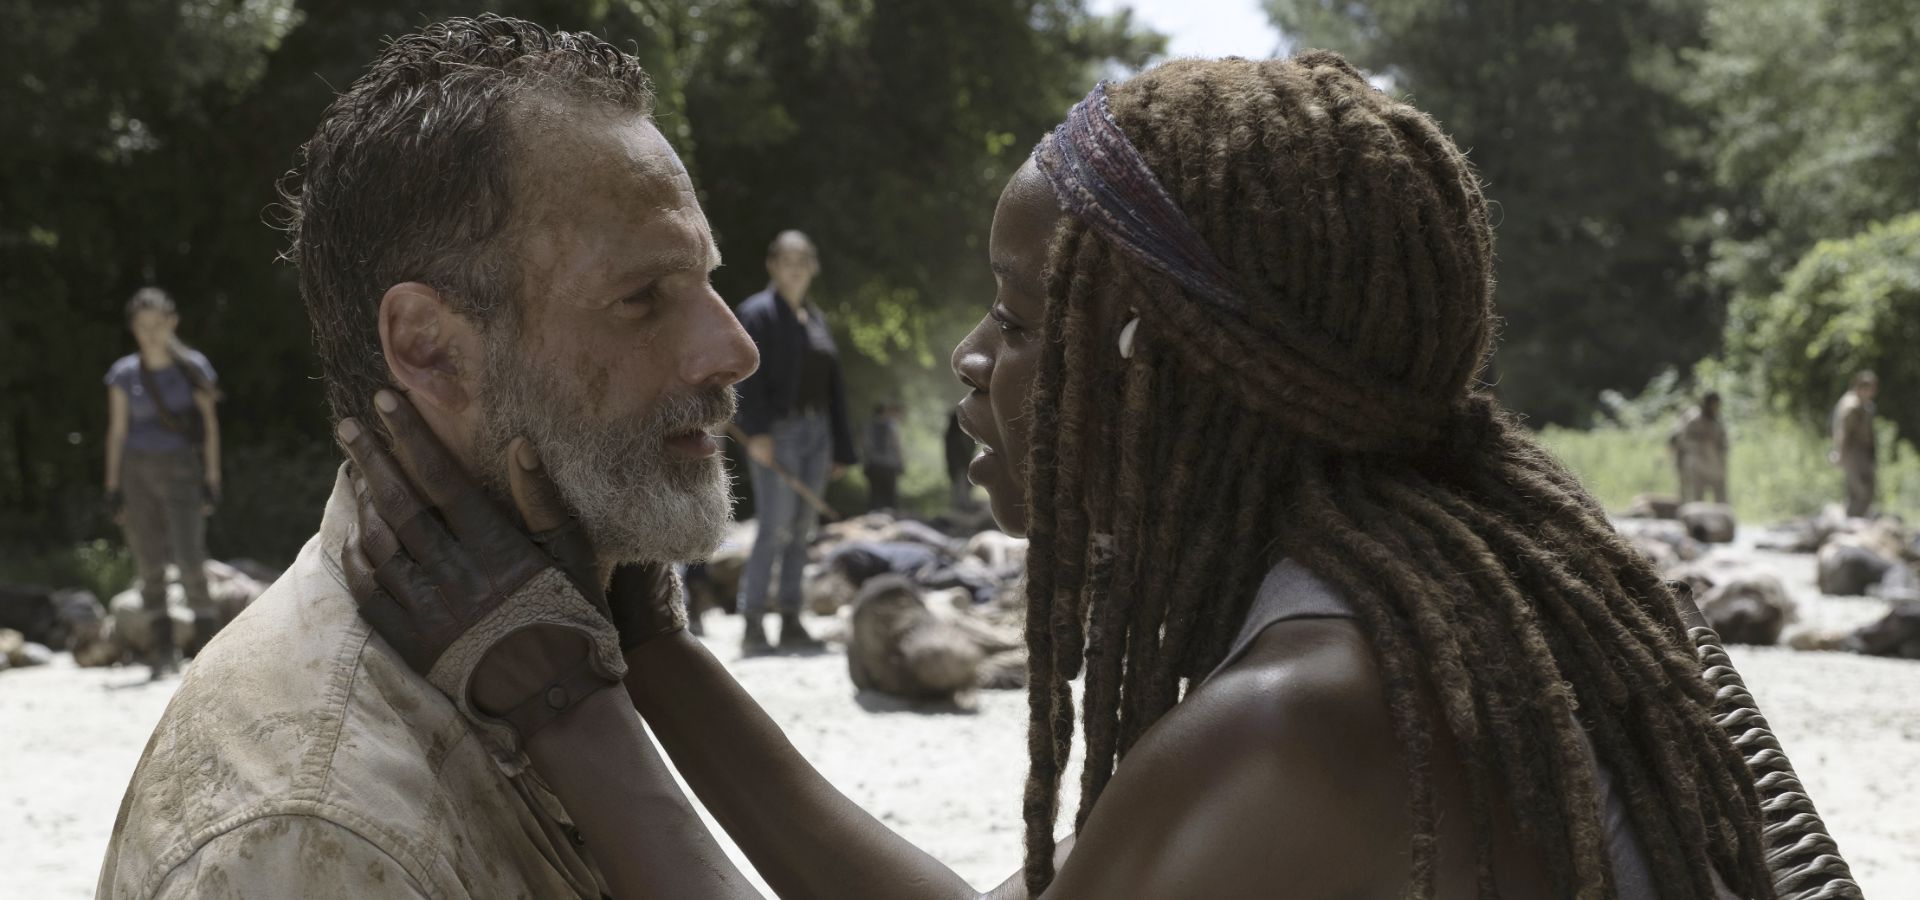 Andrew Lincoln And Danai Gurira to Reunite for a New Series in The Walking Dead Universe in 2023